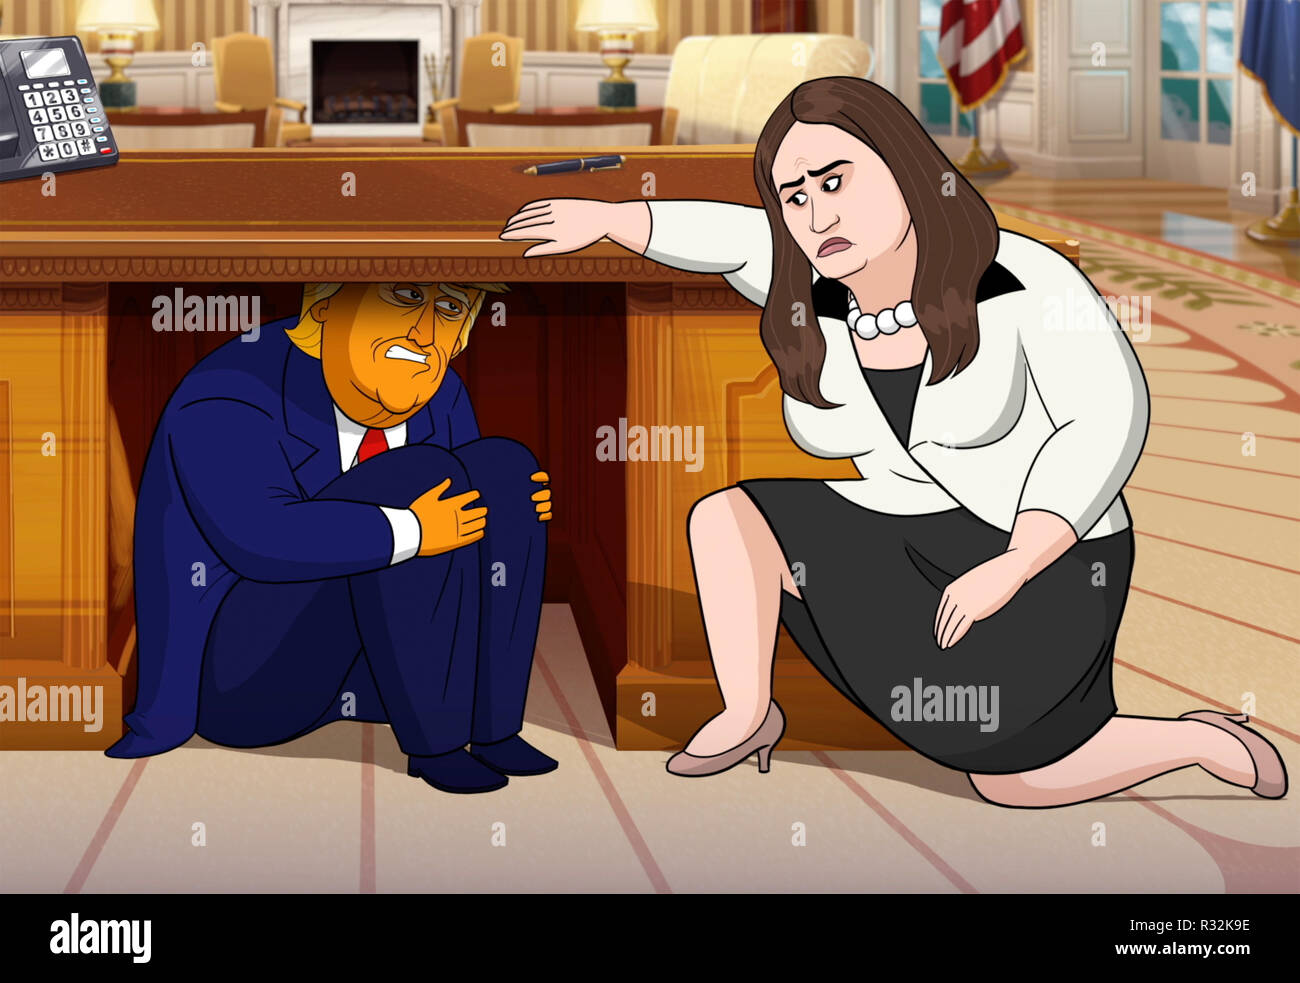 OUR CARTOON PRESIDENT, from left: Donald Trump (voiced by Jeff Bergman),  Sarah Huckabee Sanders (voiced by